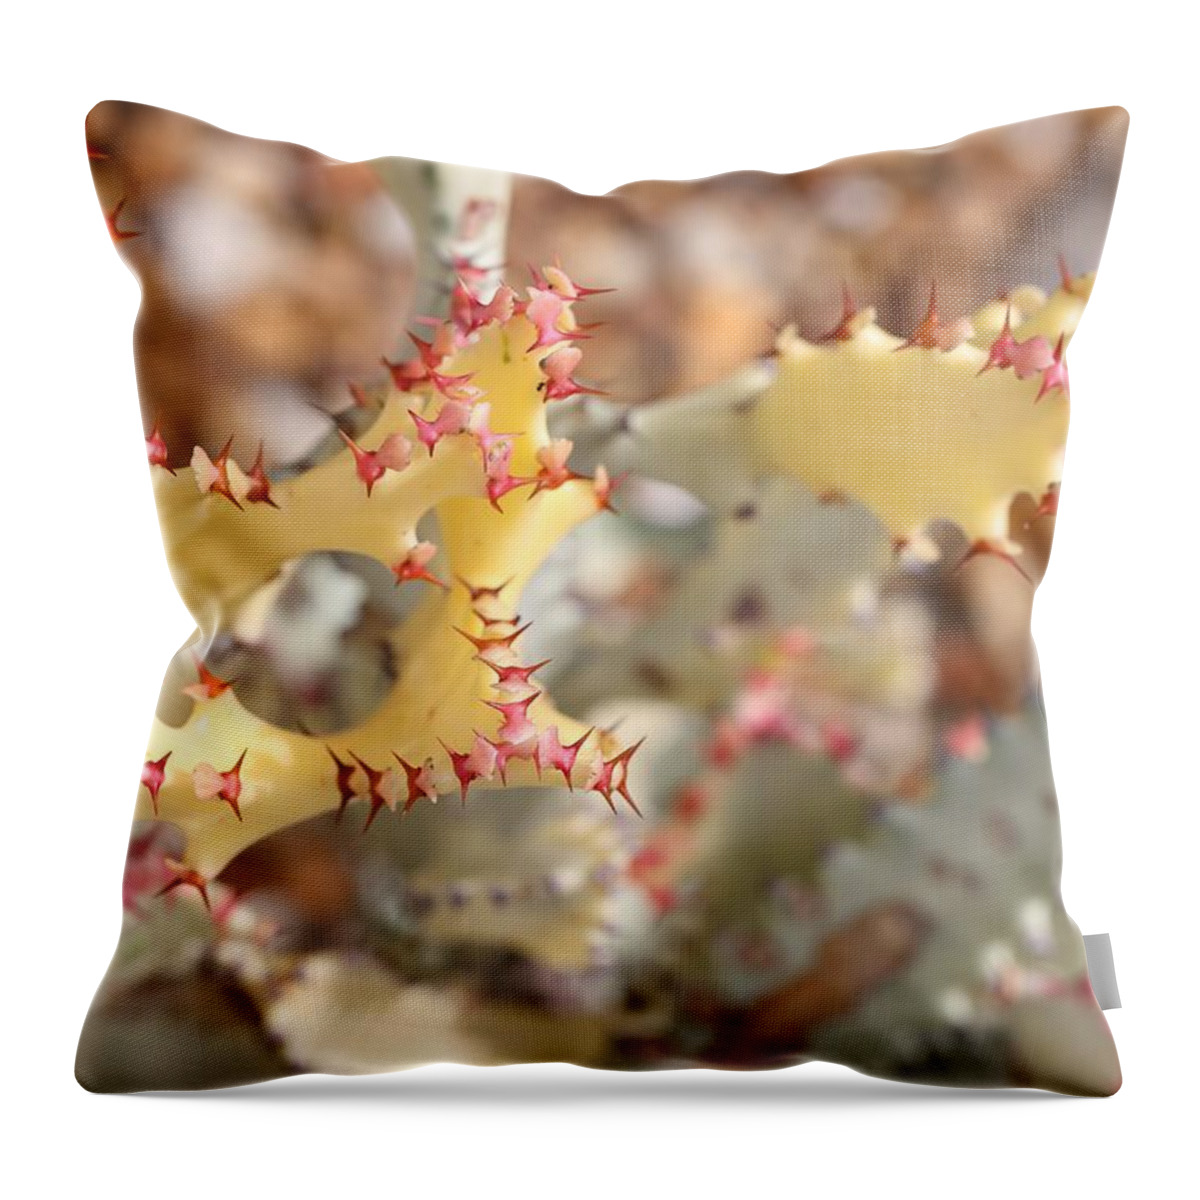 Crested Elkhorn Throw Pillow featuring the photograph Crested Elkhorn by Mingming Jiang